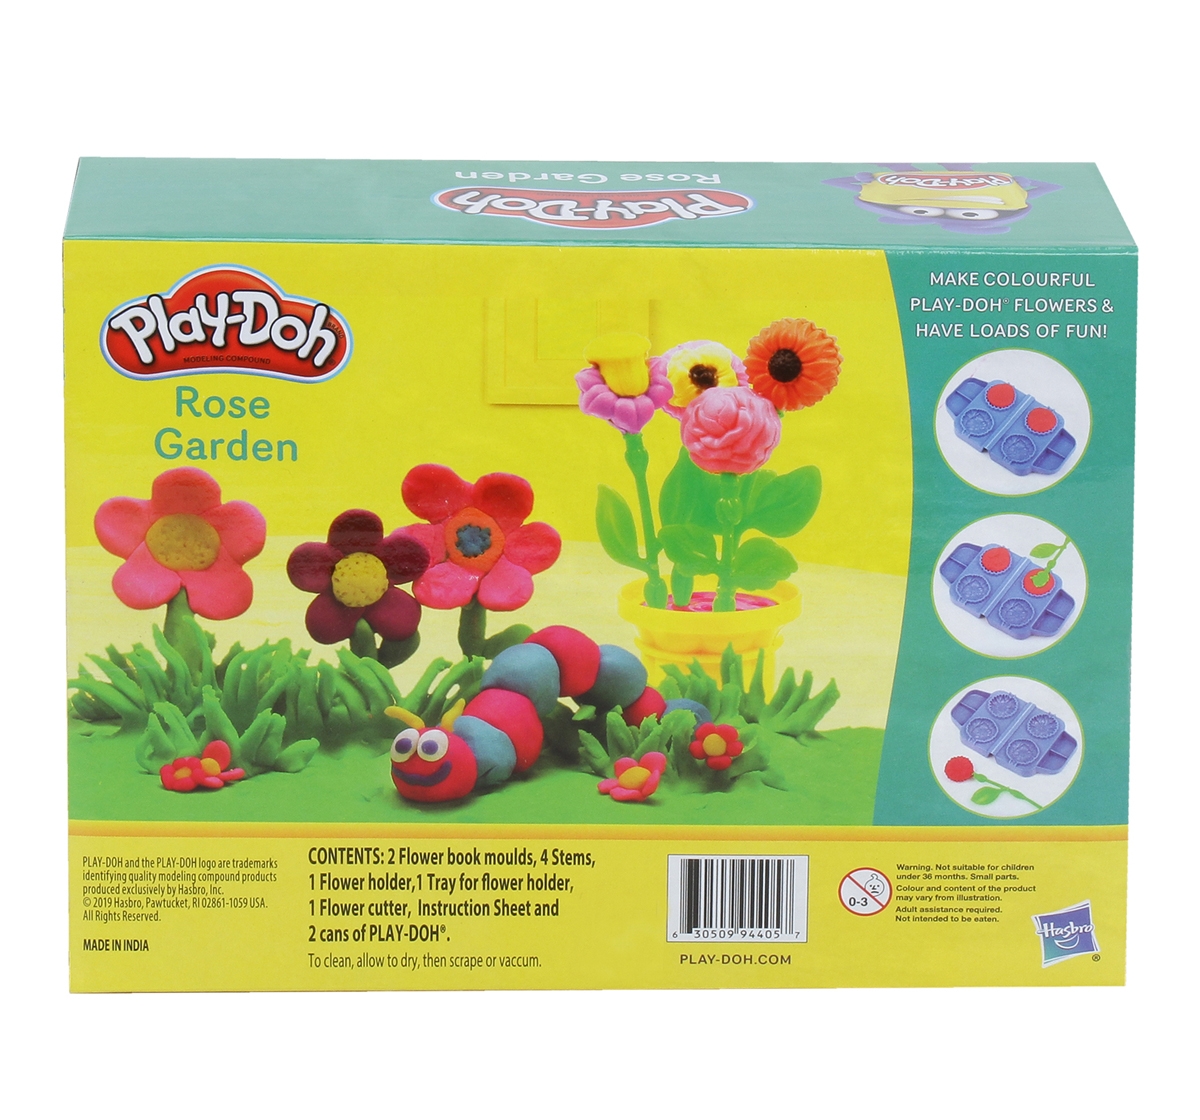 Play-Doh | Play Doh Rose Garden Playset for Kids 3Y+, Multicolour 4